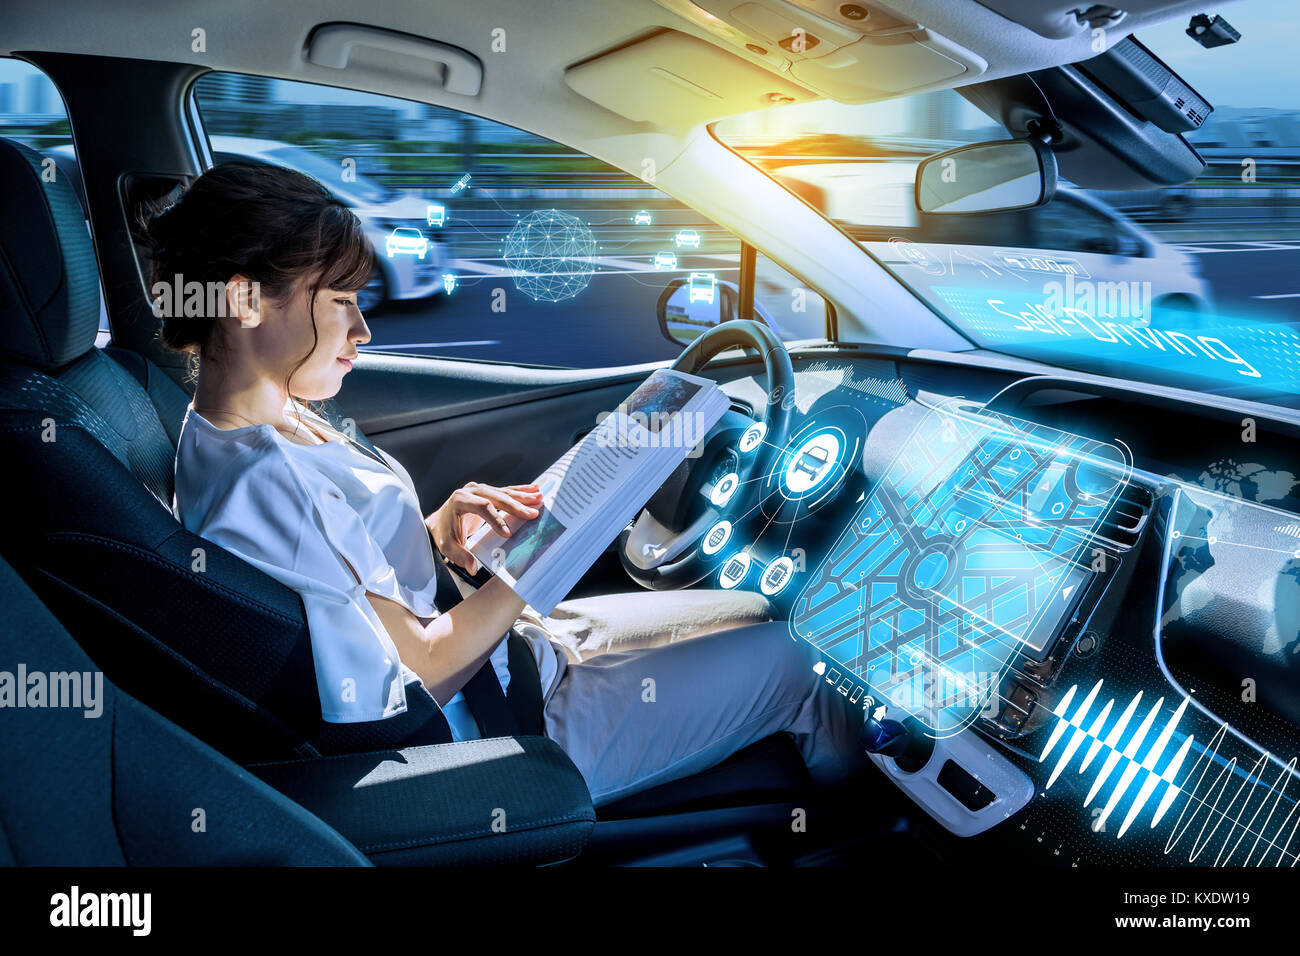 young woman reading a book in a autonomous car. driverless car. self driving vehicle. heads up display. automotive technology. Stock Photo